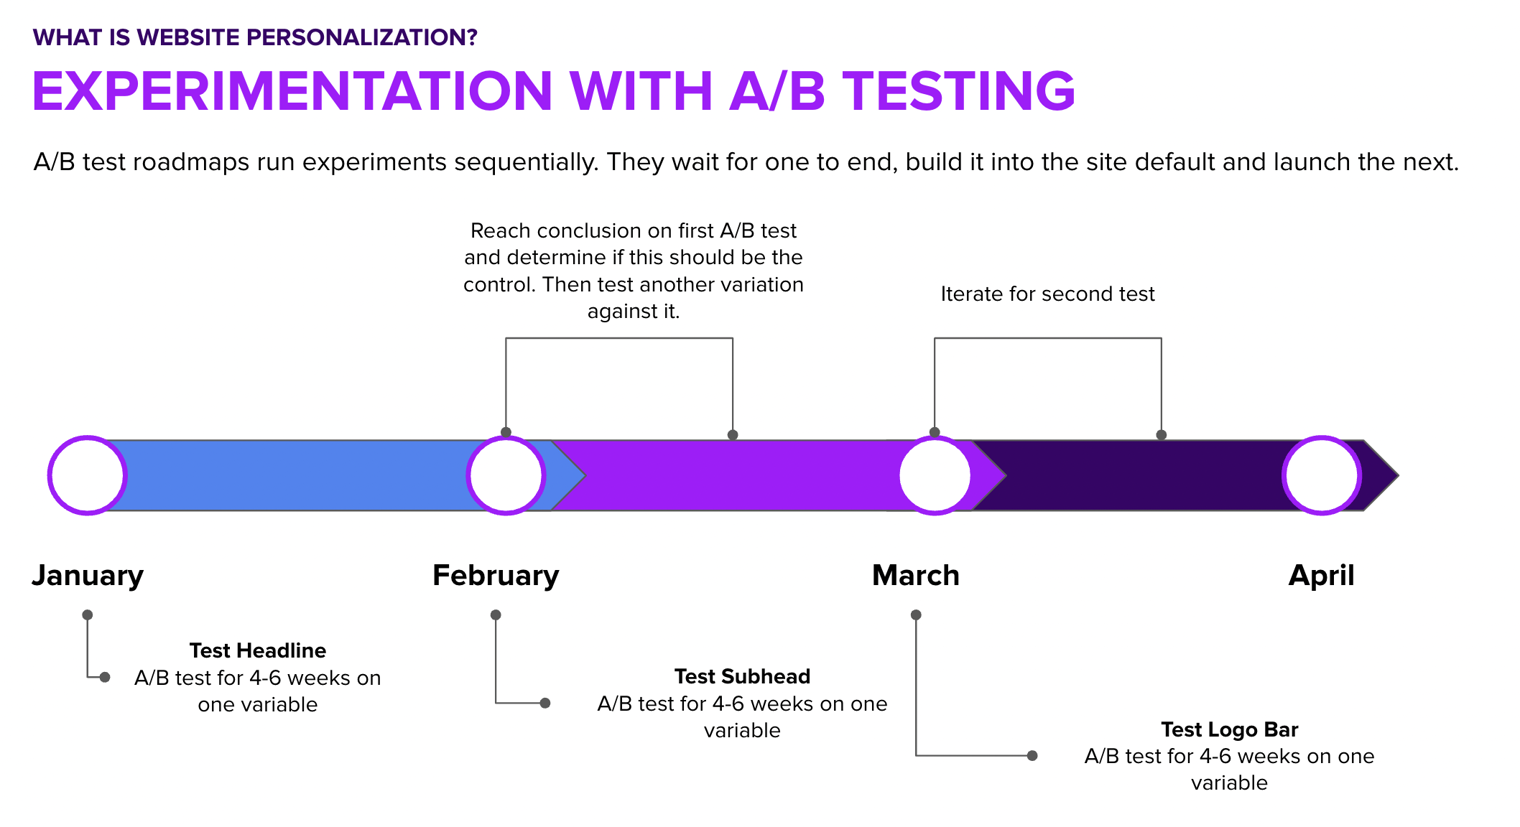 A/B testing is a sequential method of testing